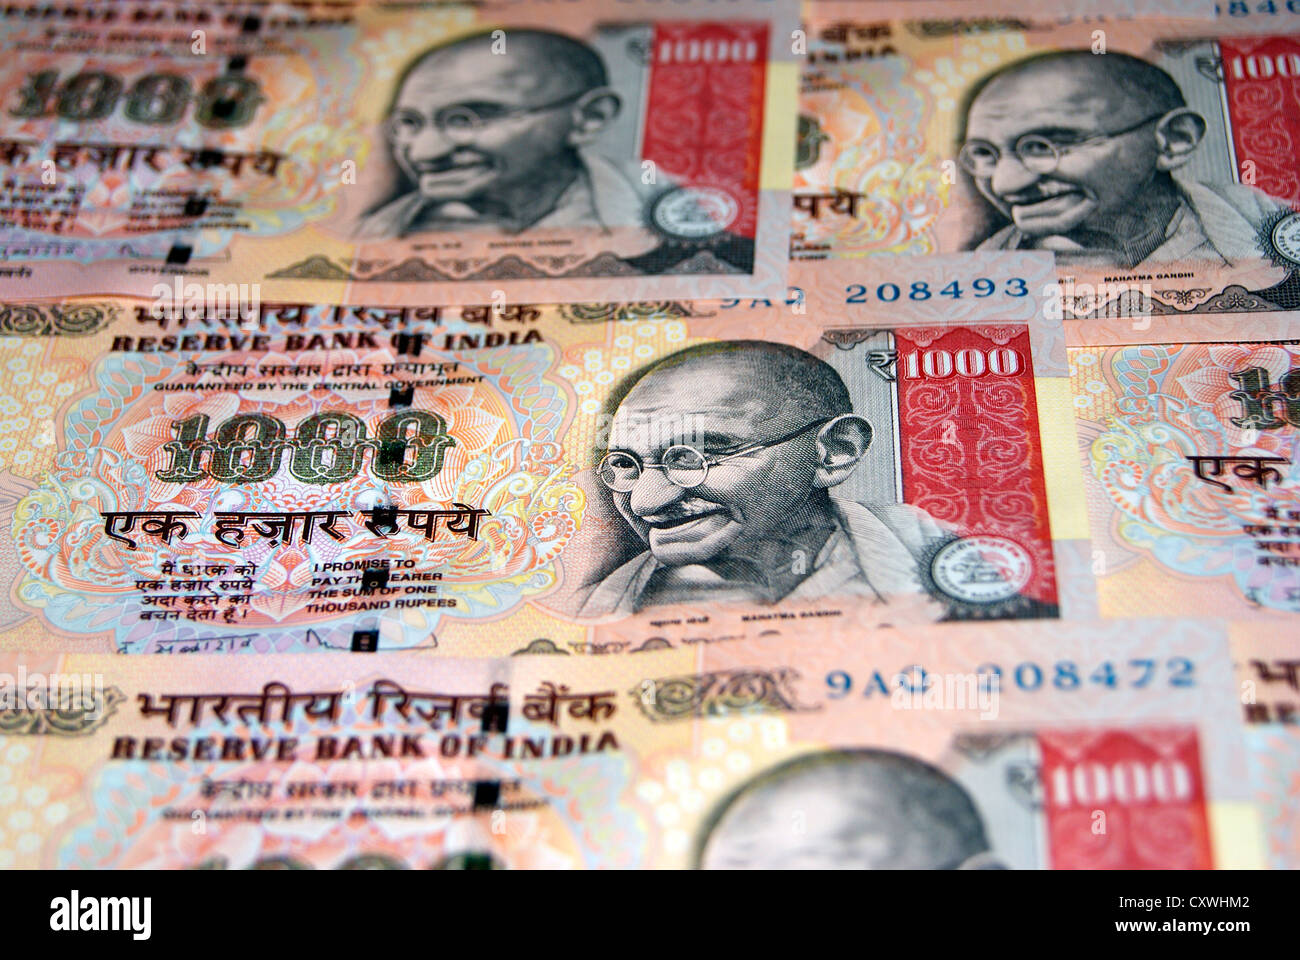 Indian Currency Banknotes old 1000 Rupees Thousand rupee notes Mahatma Gandhi India Stock Photo